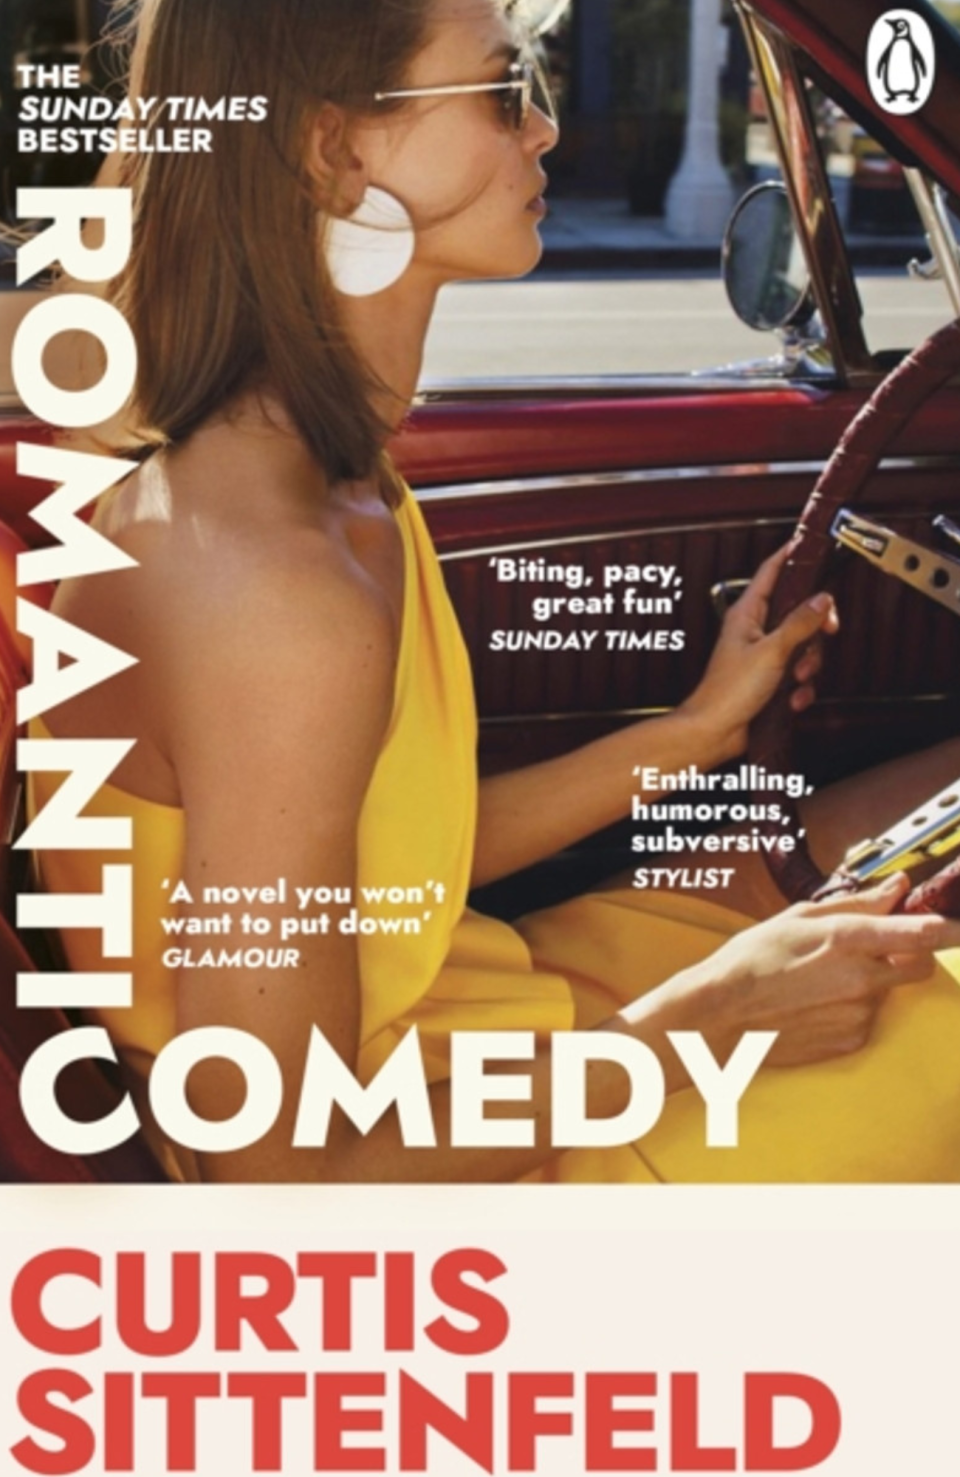 Cover of the book Romantic Comedy by Curtis Sittenfeld. Shows a woman driving a car.